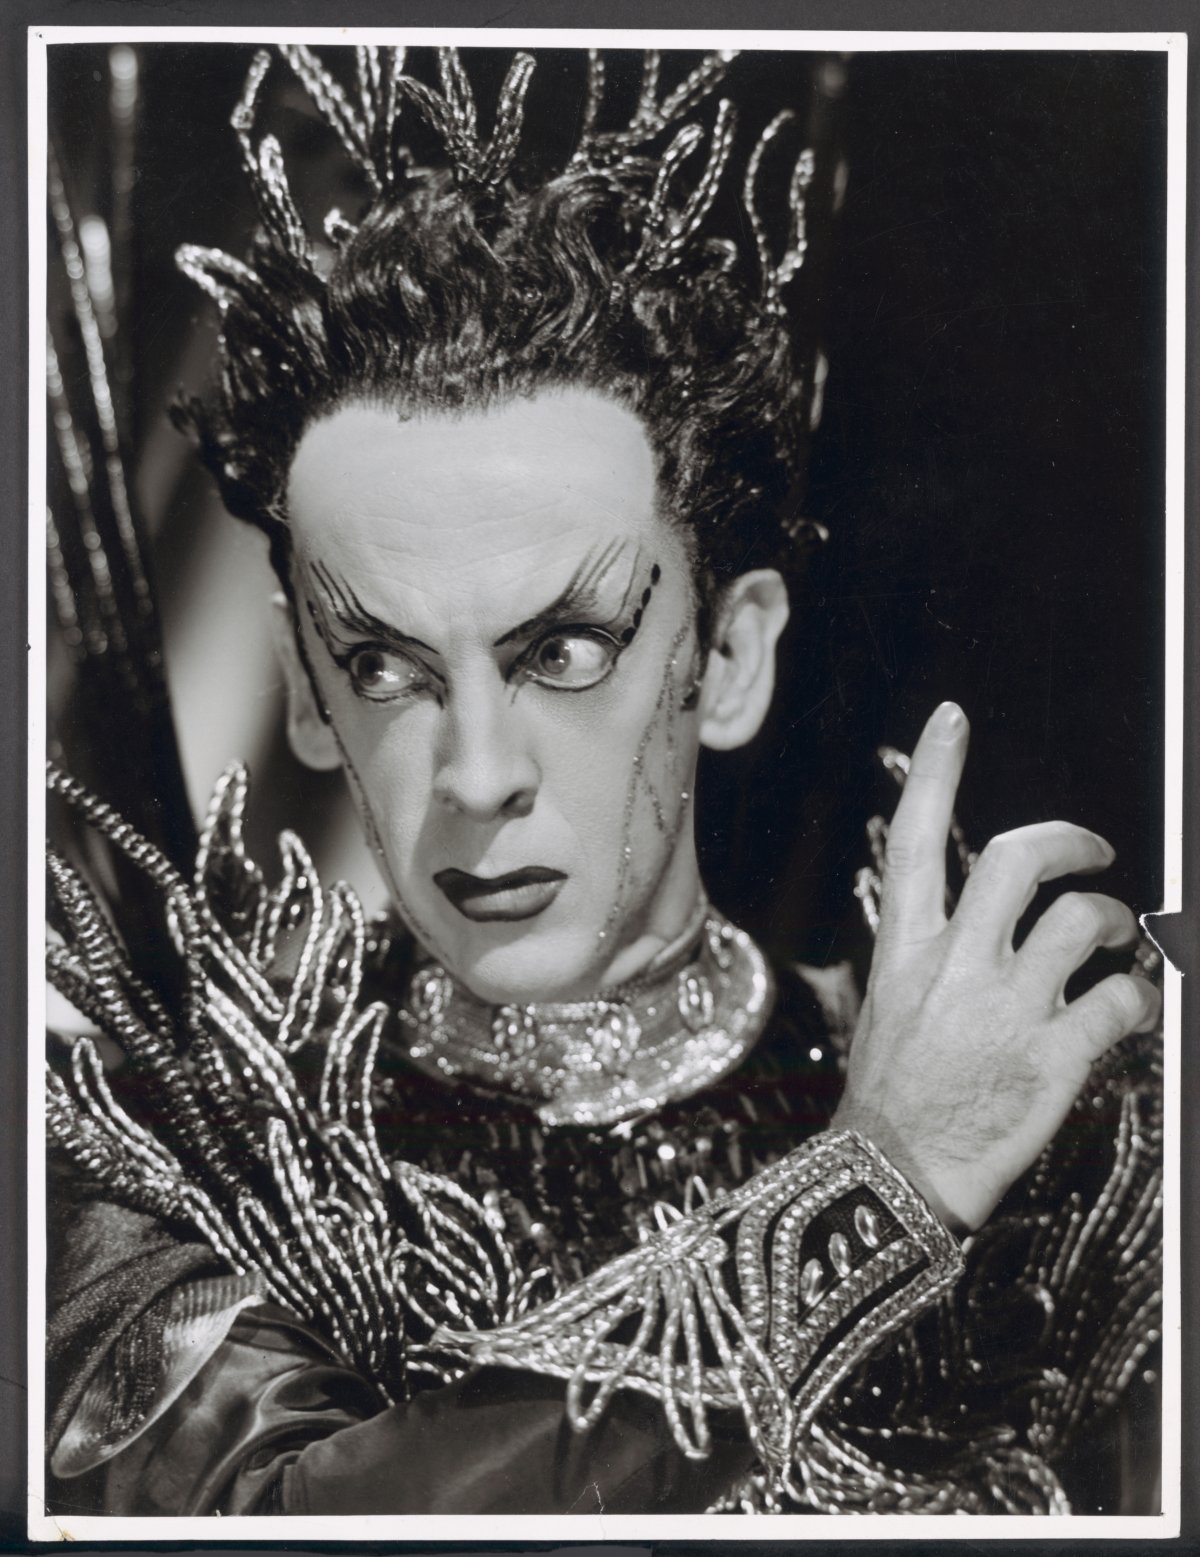 Black and white closeup photograph of Robert Helpmann in stage makeup, wearing a costume that features a beaded headpiece, cuff and collar.